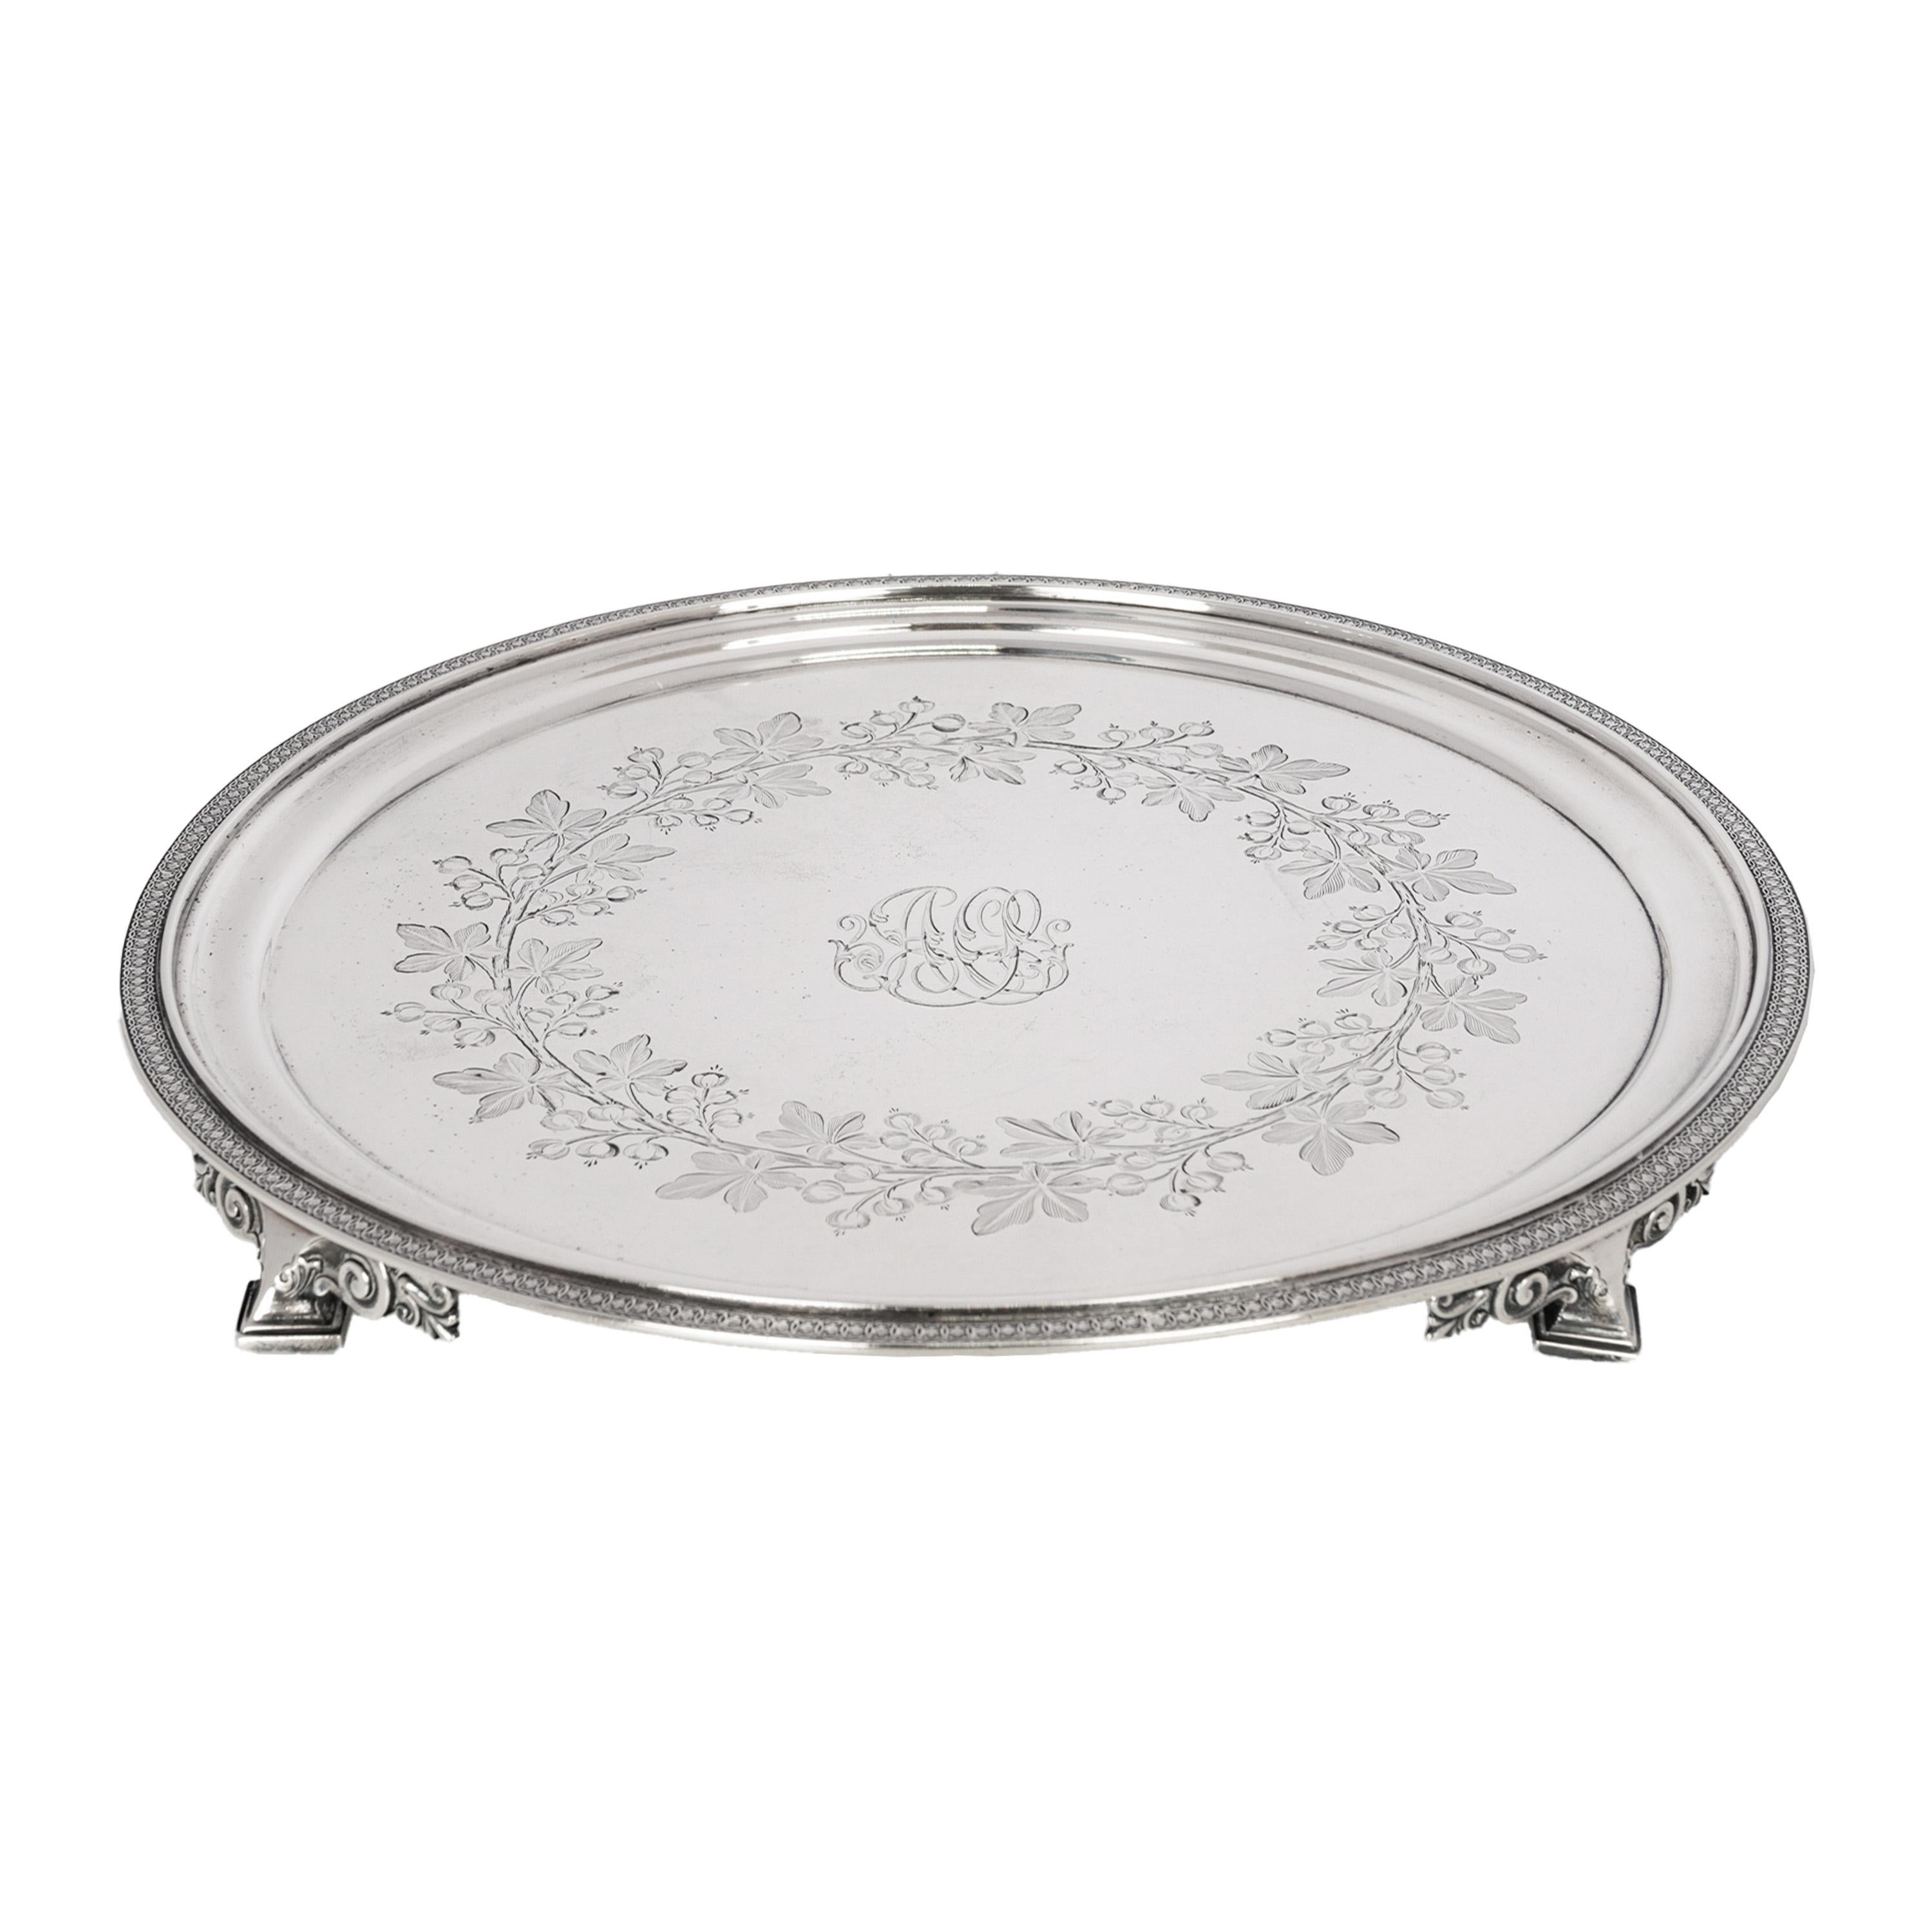 Antique Engraved Sterling Silver Tiffany & Co Footed Salver Tray New York 1870 For Sale